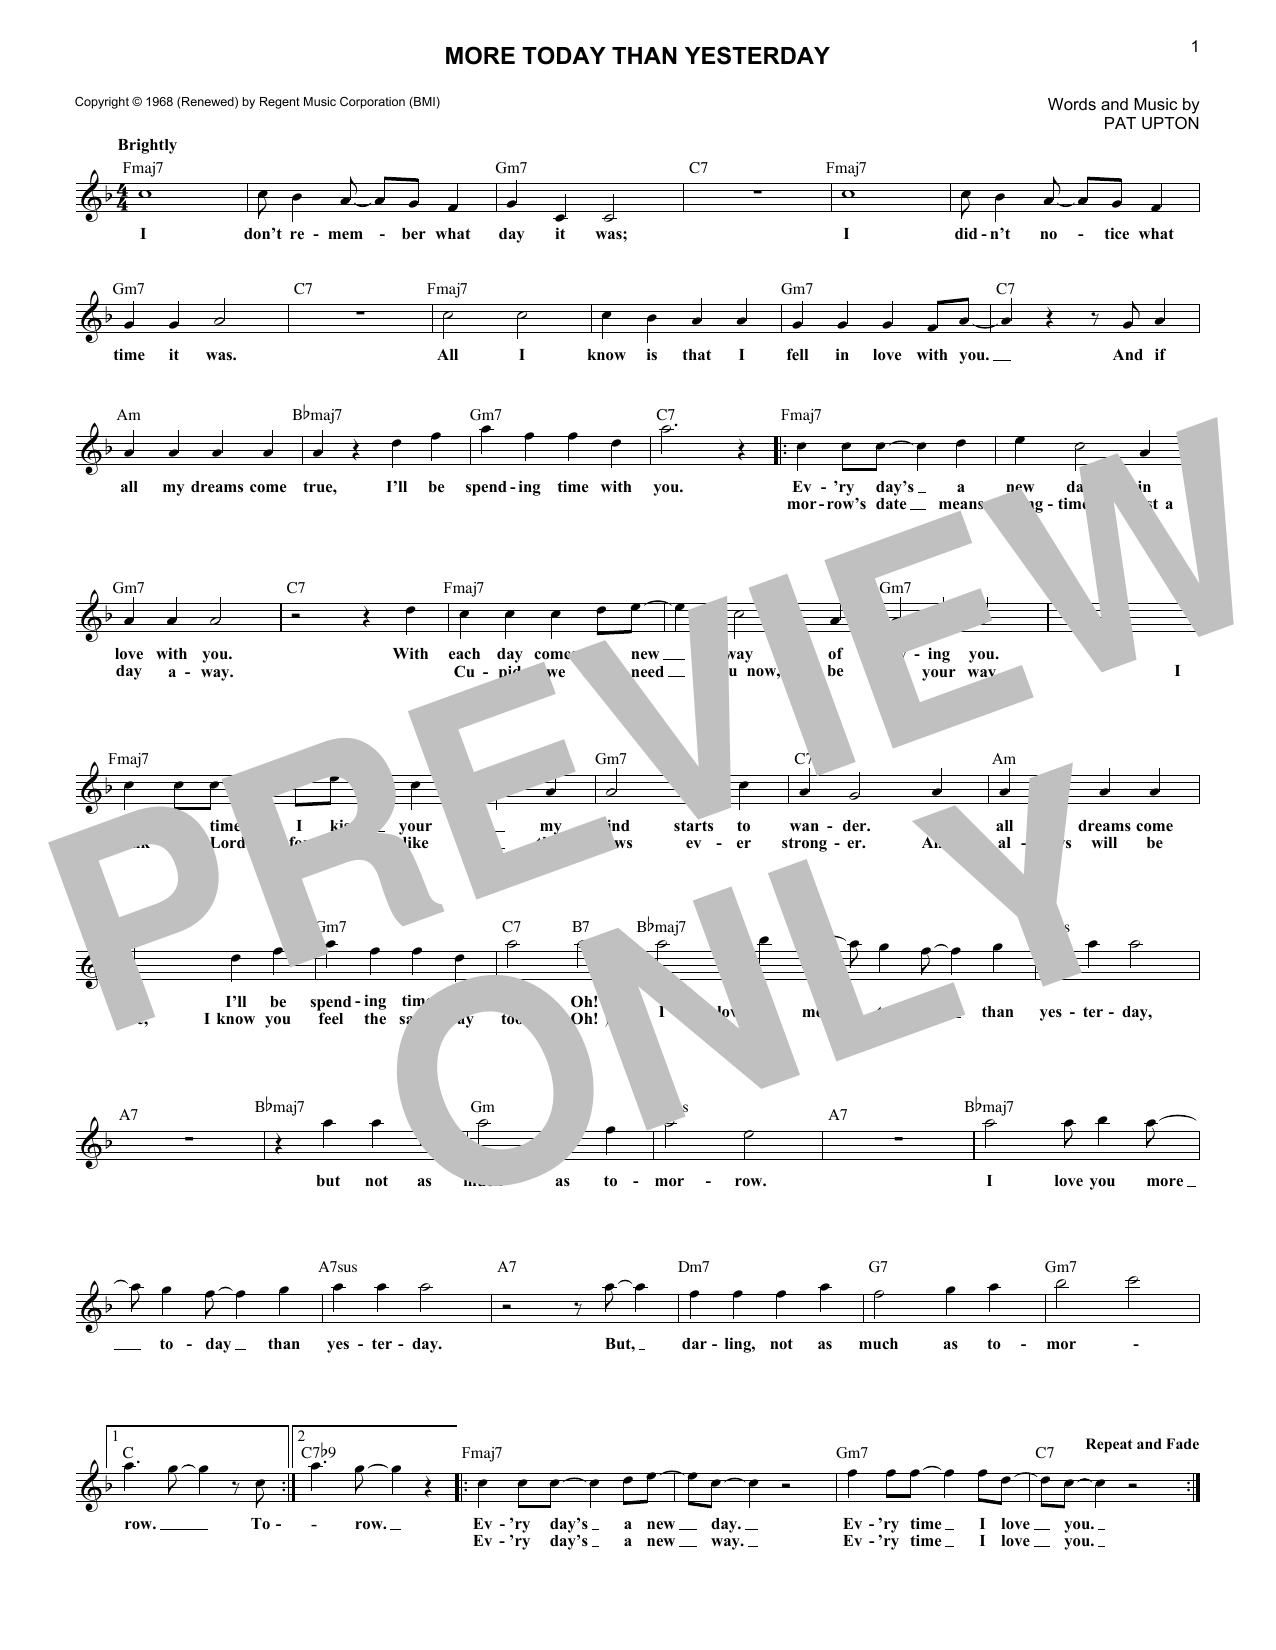 Spiral Starecase More Today Than Yesterday Chords Sheet Music